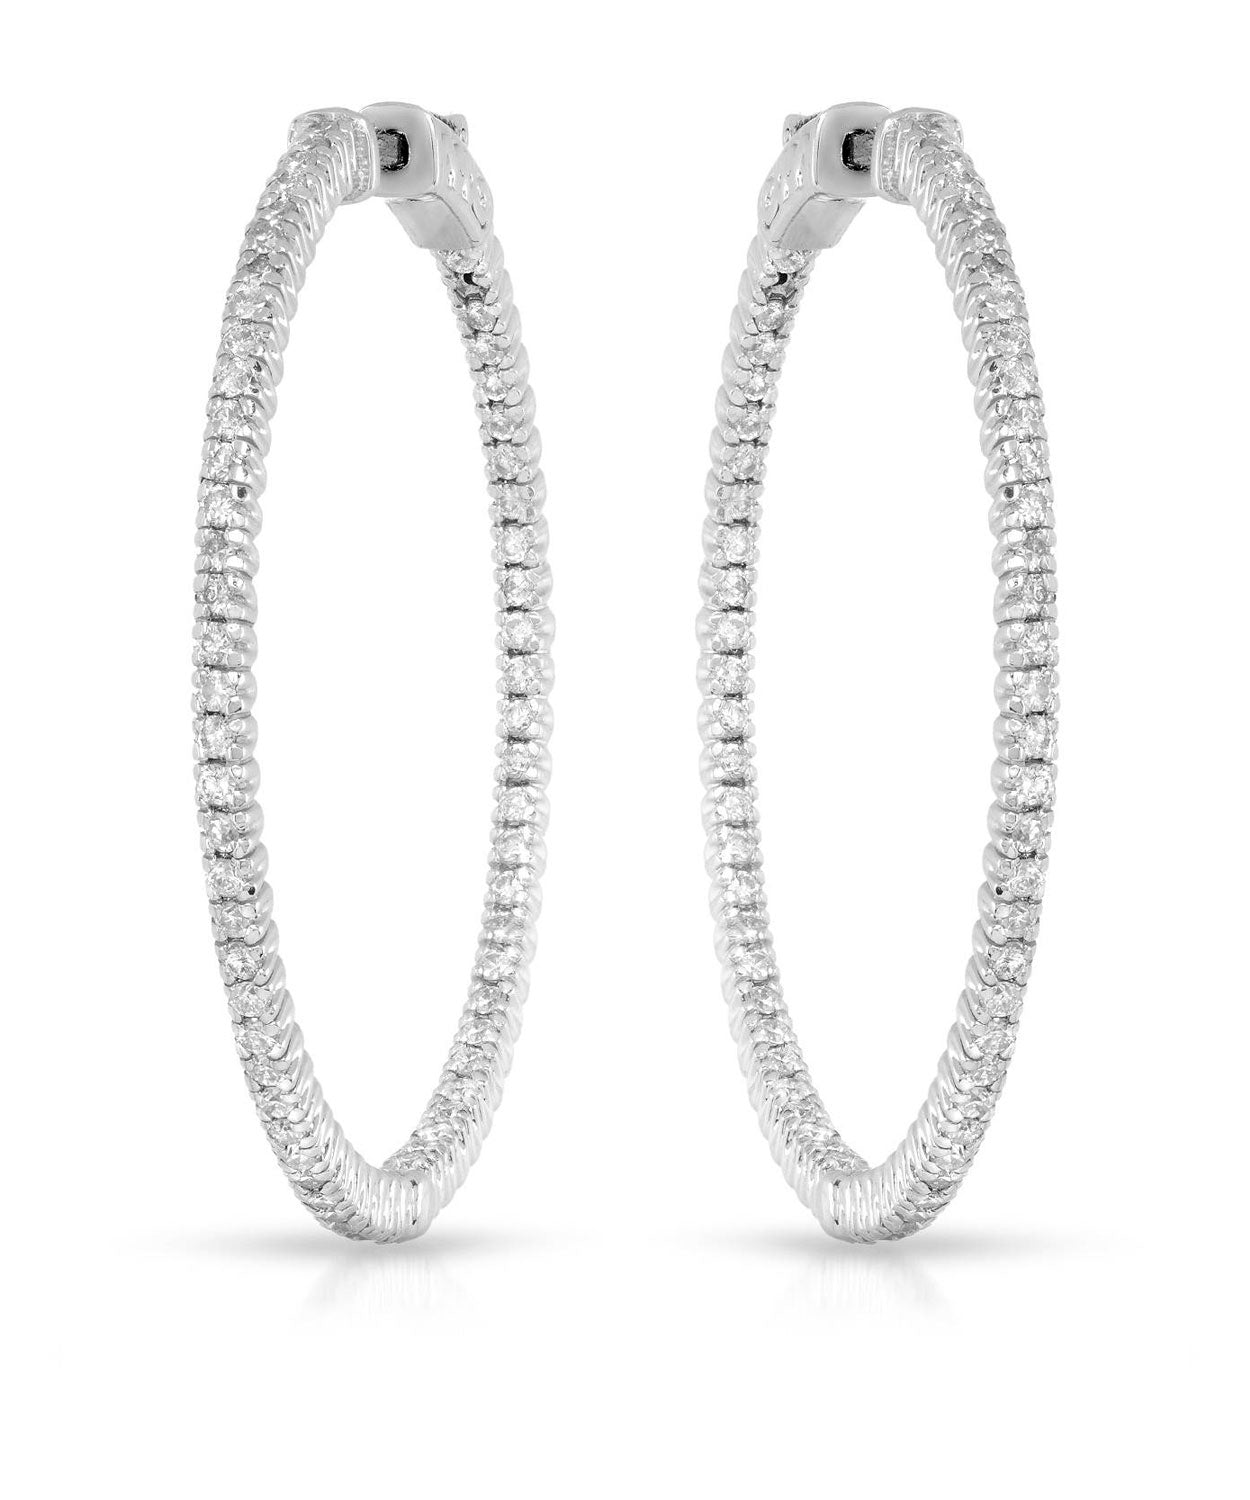 Allure Collection 1.65 ctw Diamond 14k White Gold Inside-Out Hoop Earrings View 1